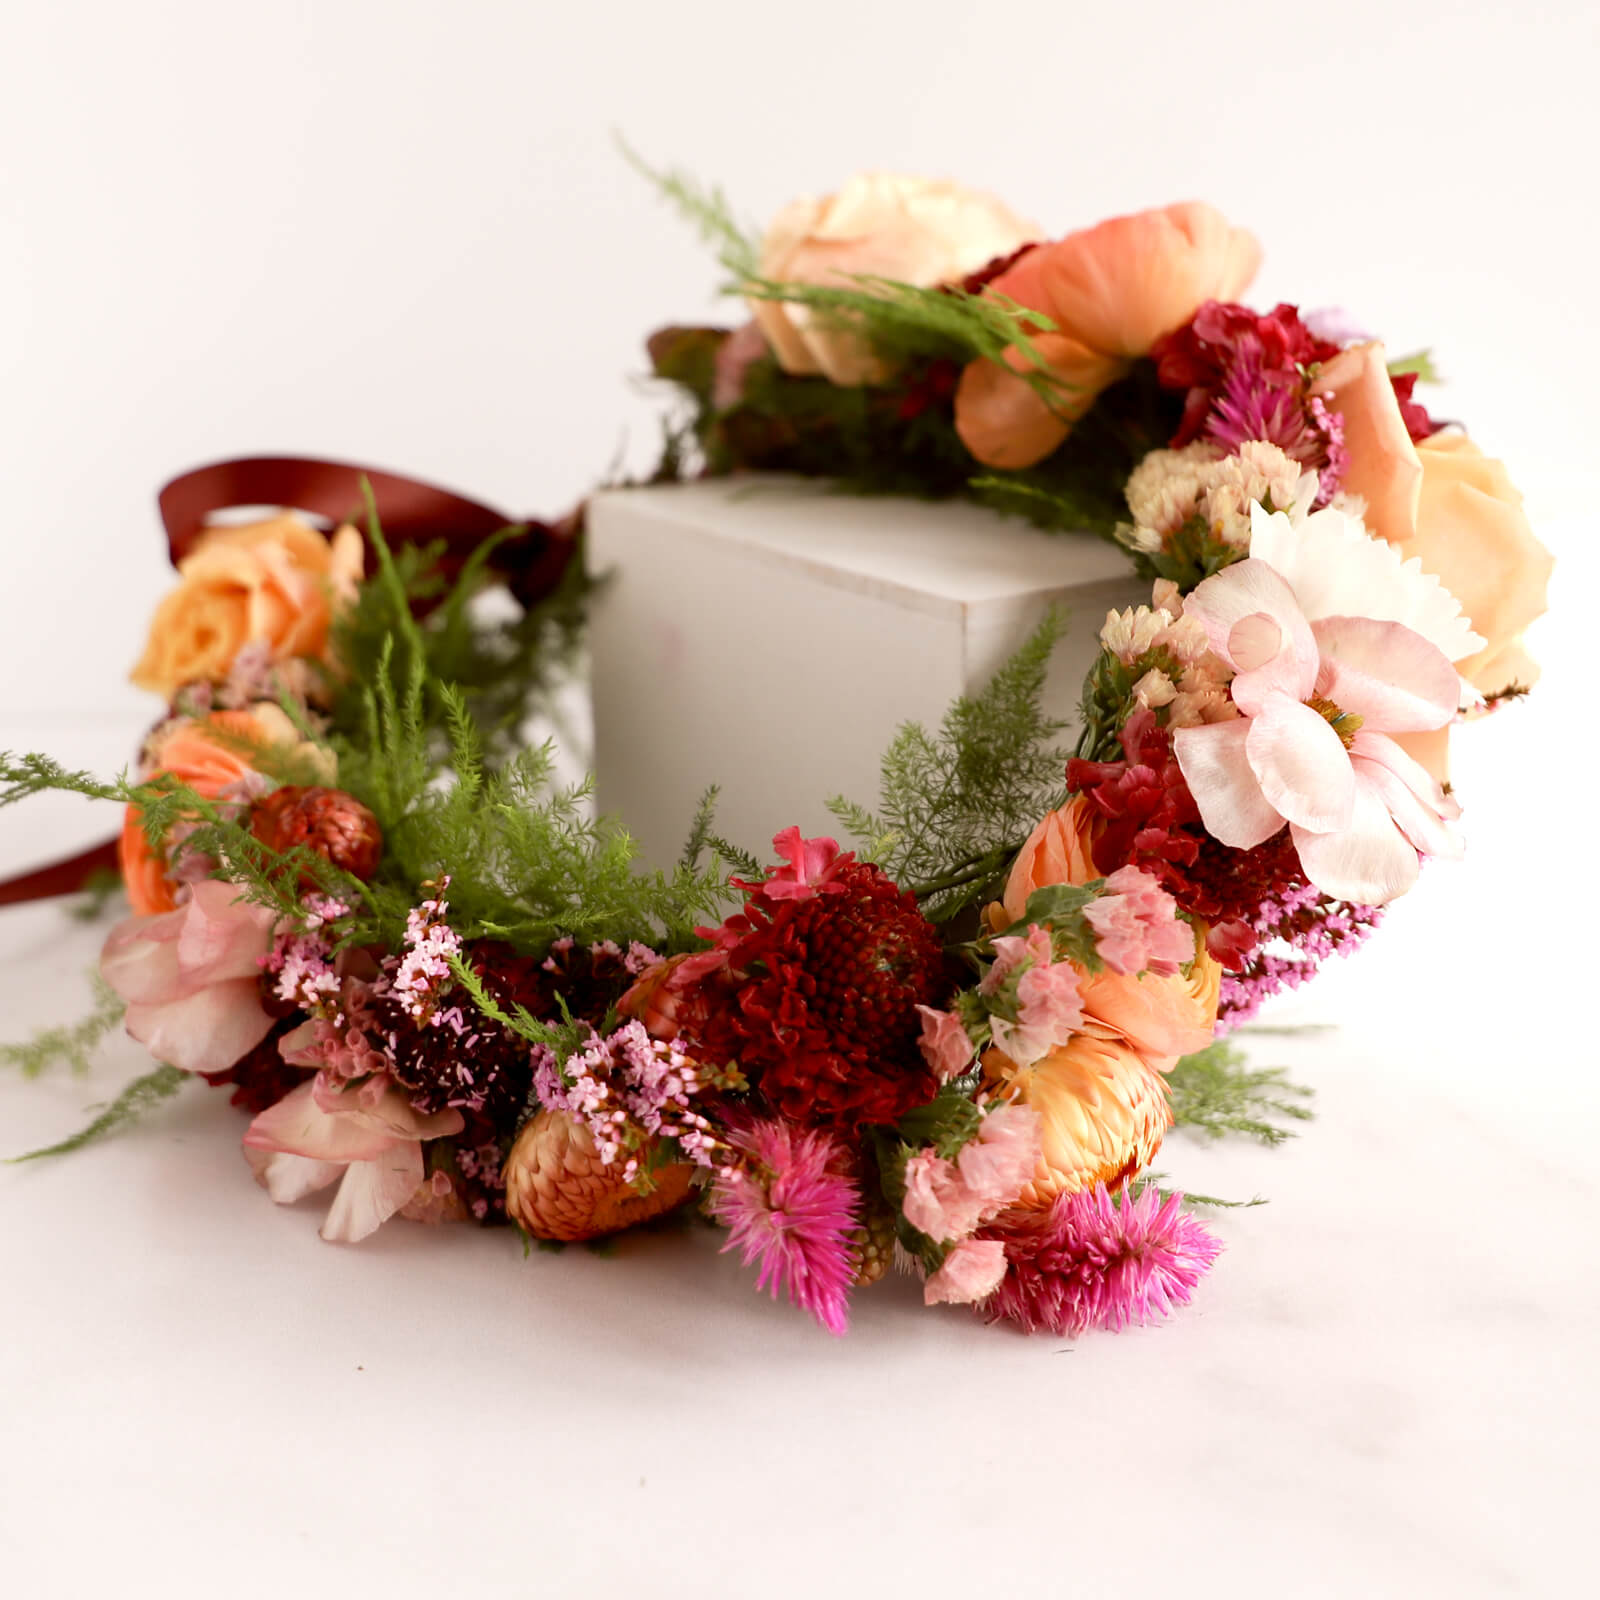 Deluxe floral crown made of pink, purple, orange and peach flowers.